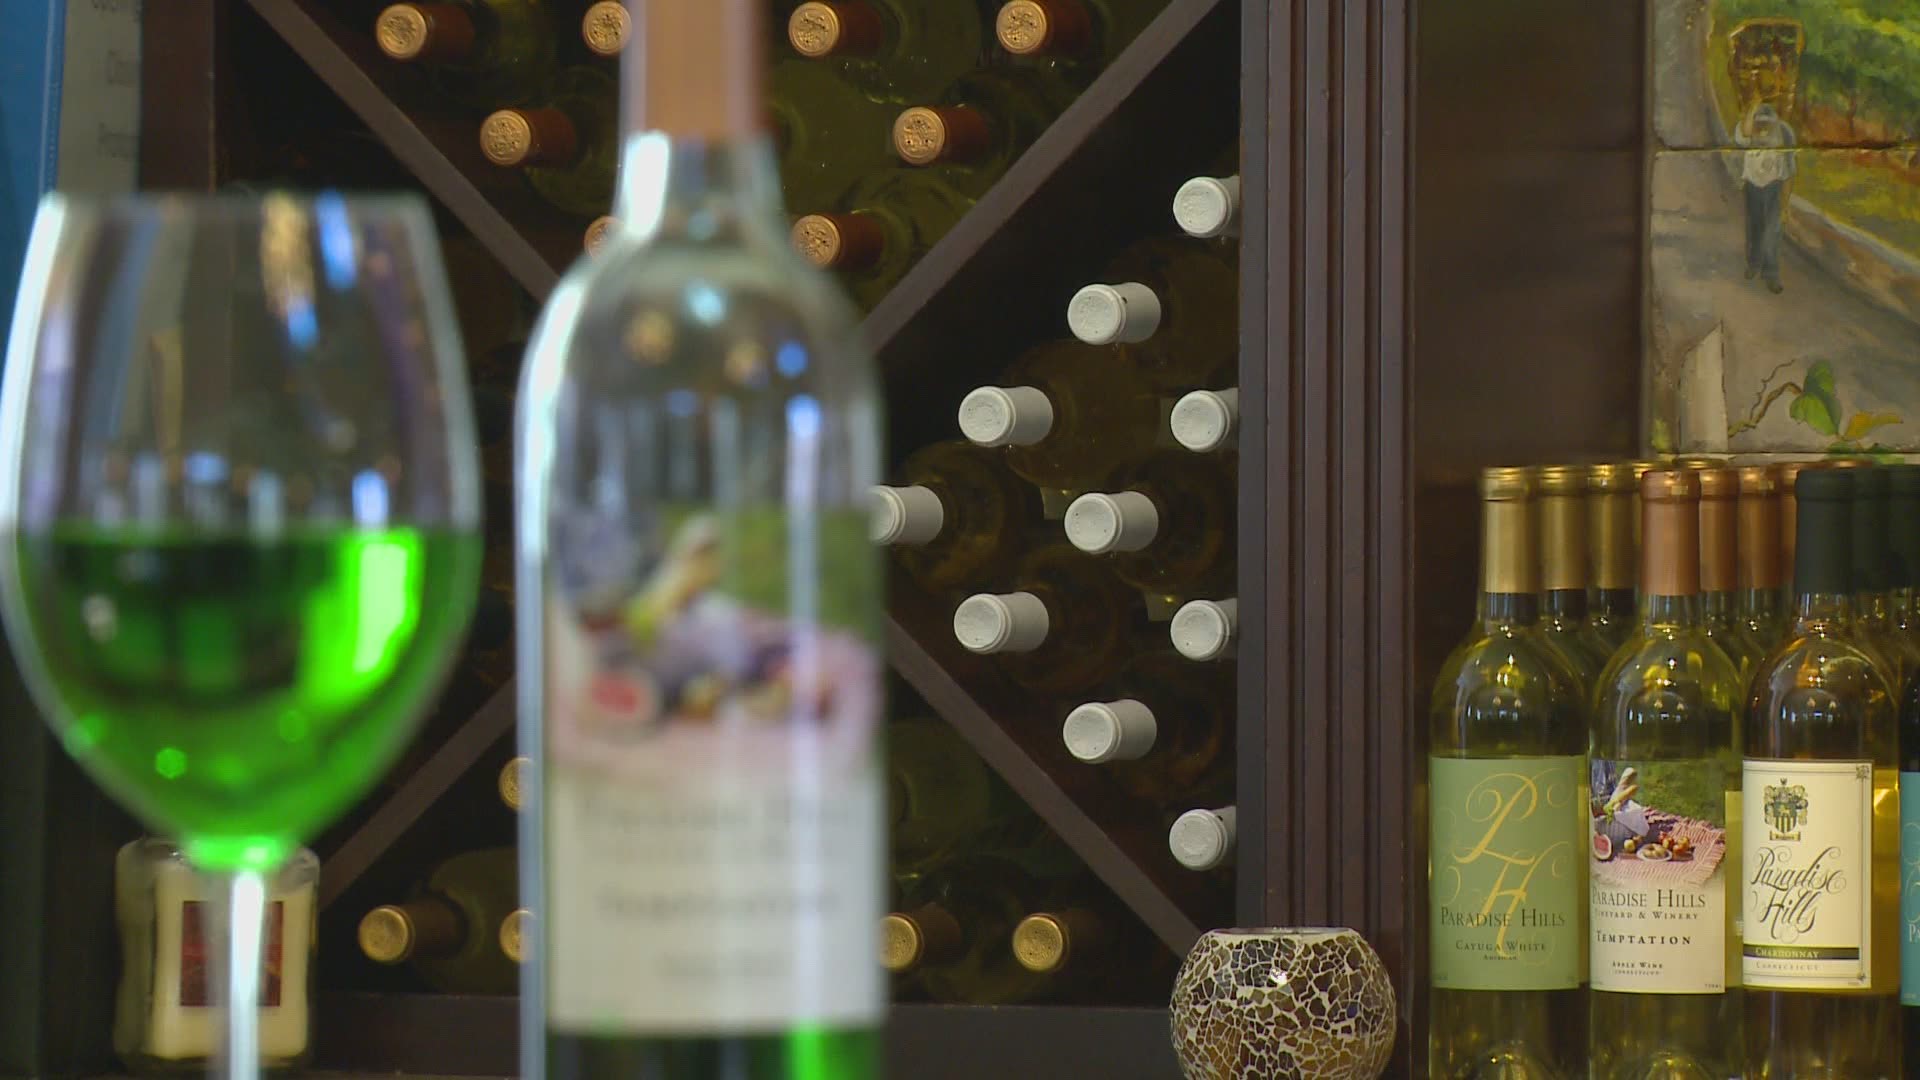 The winemakers at Paradise Hills have been making their green wine for the past eight years